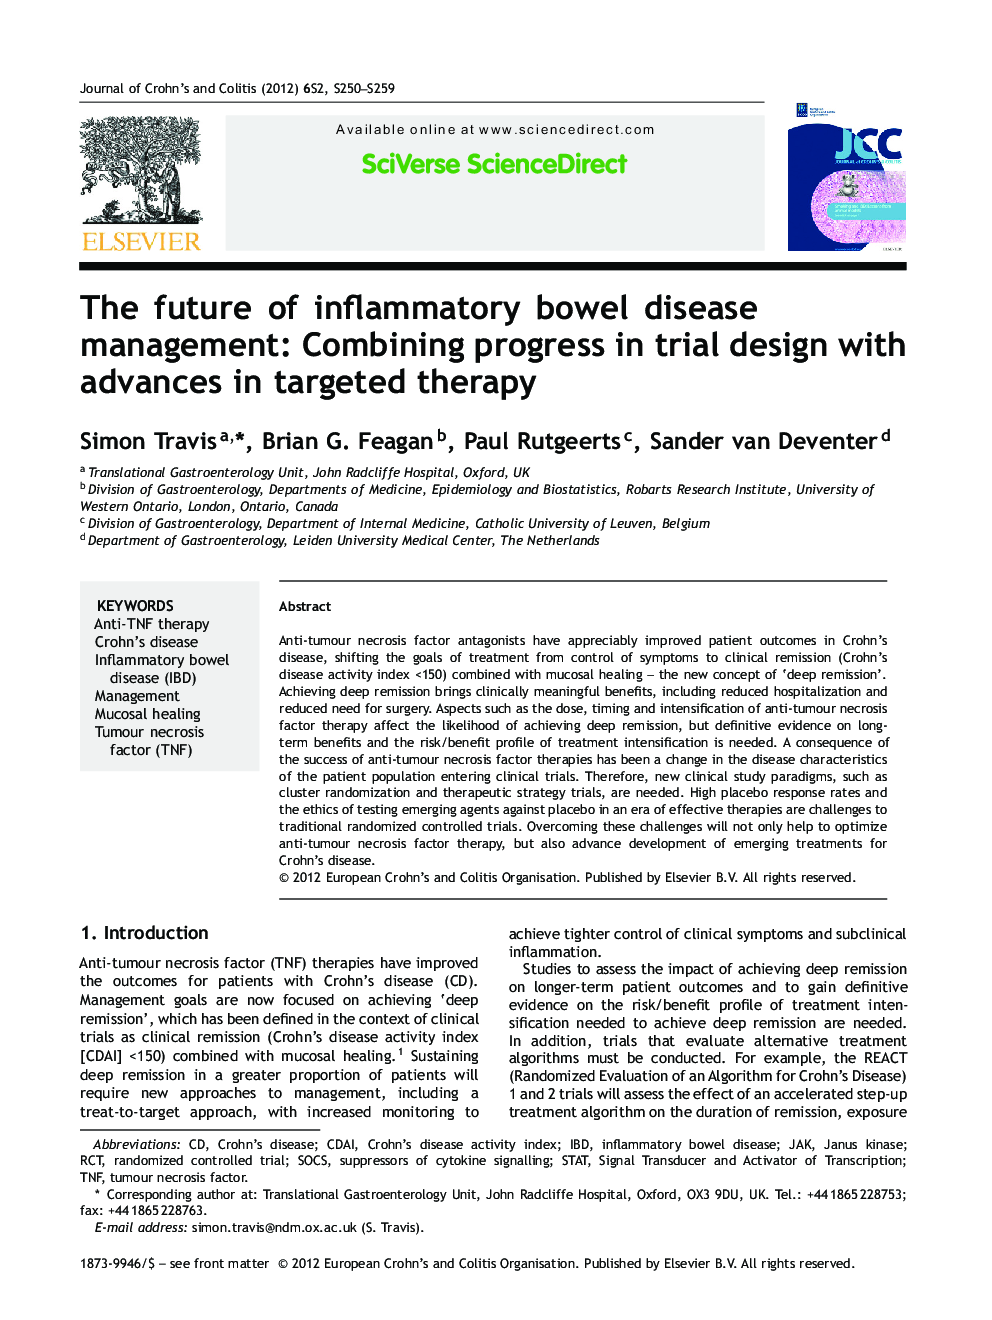 The future of inflammatory bowel disease management: Combining progress in trial design with advances in targeted therapy